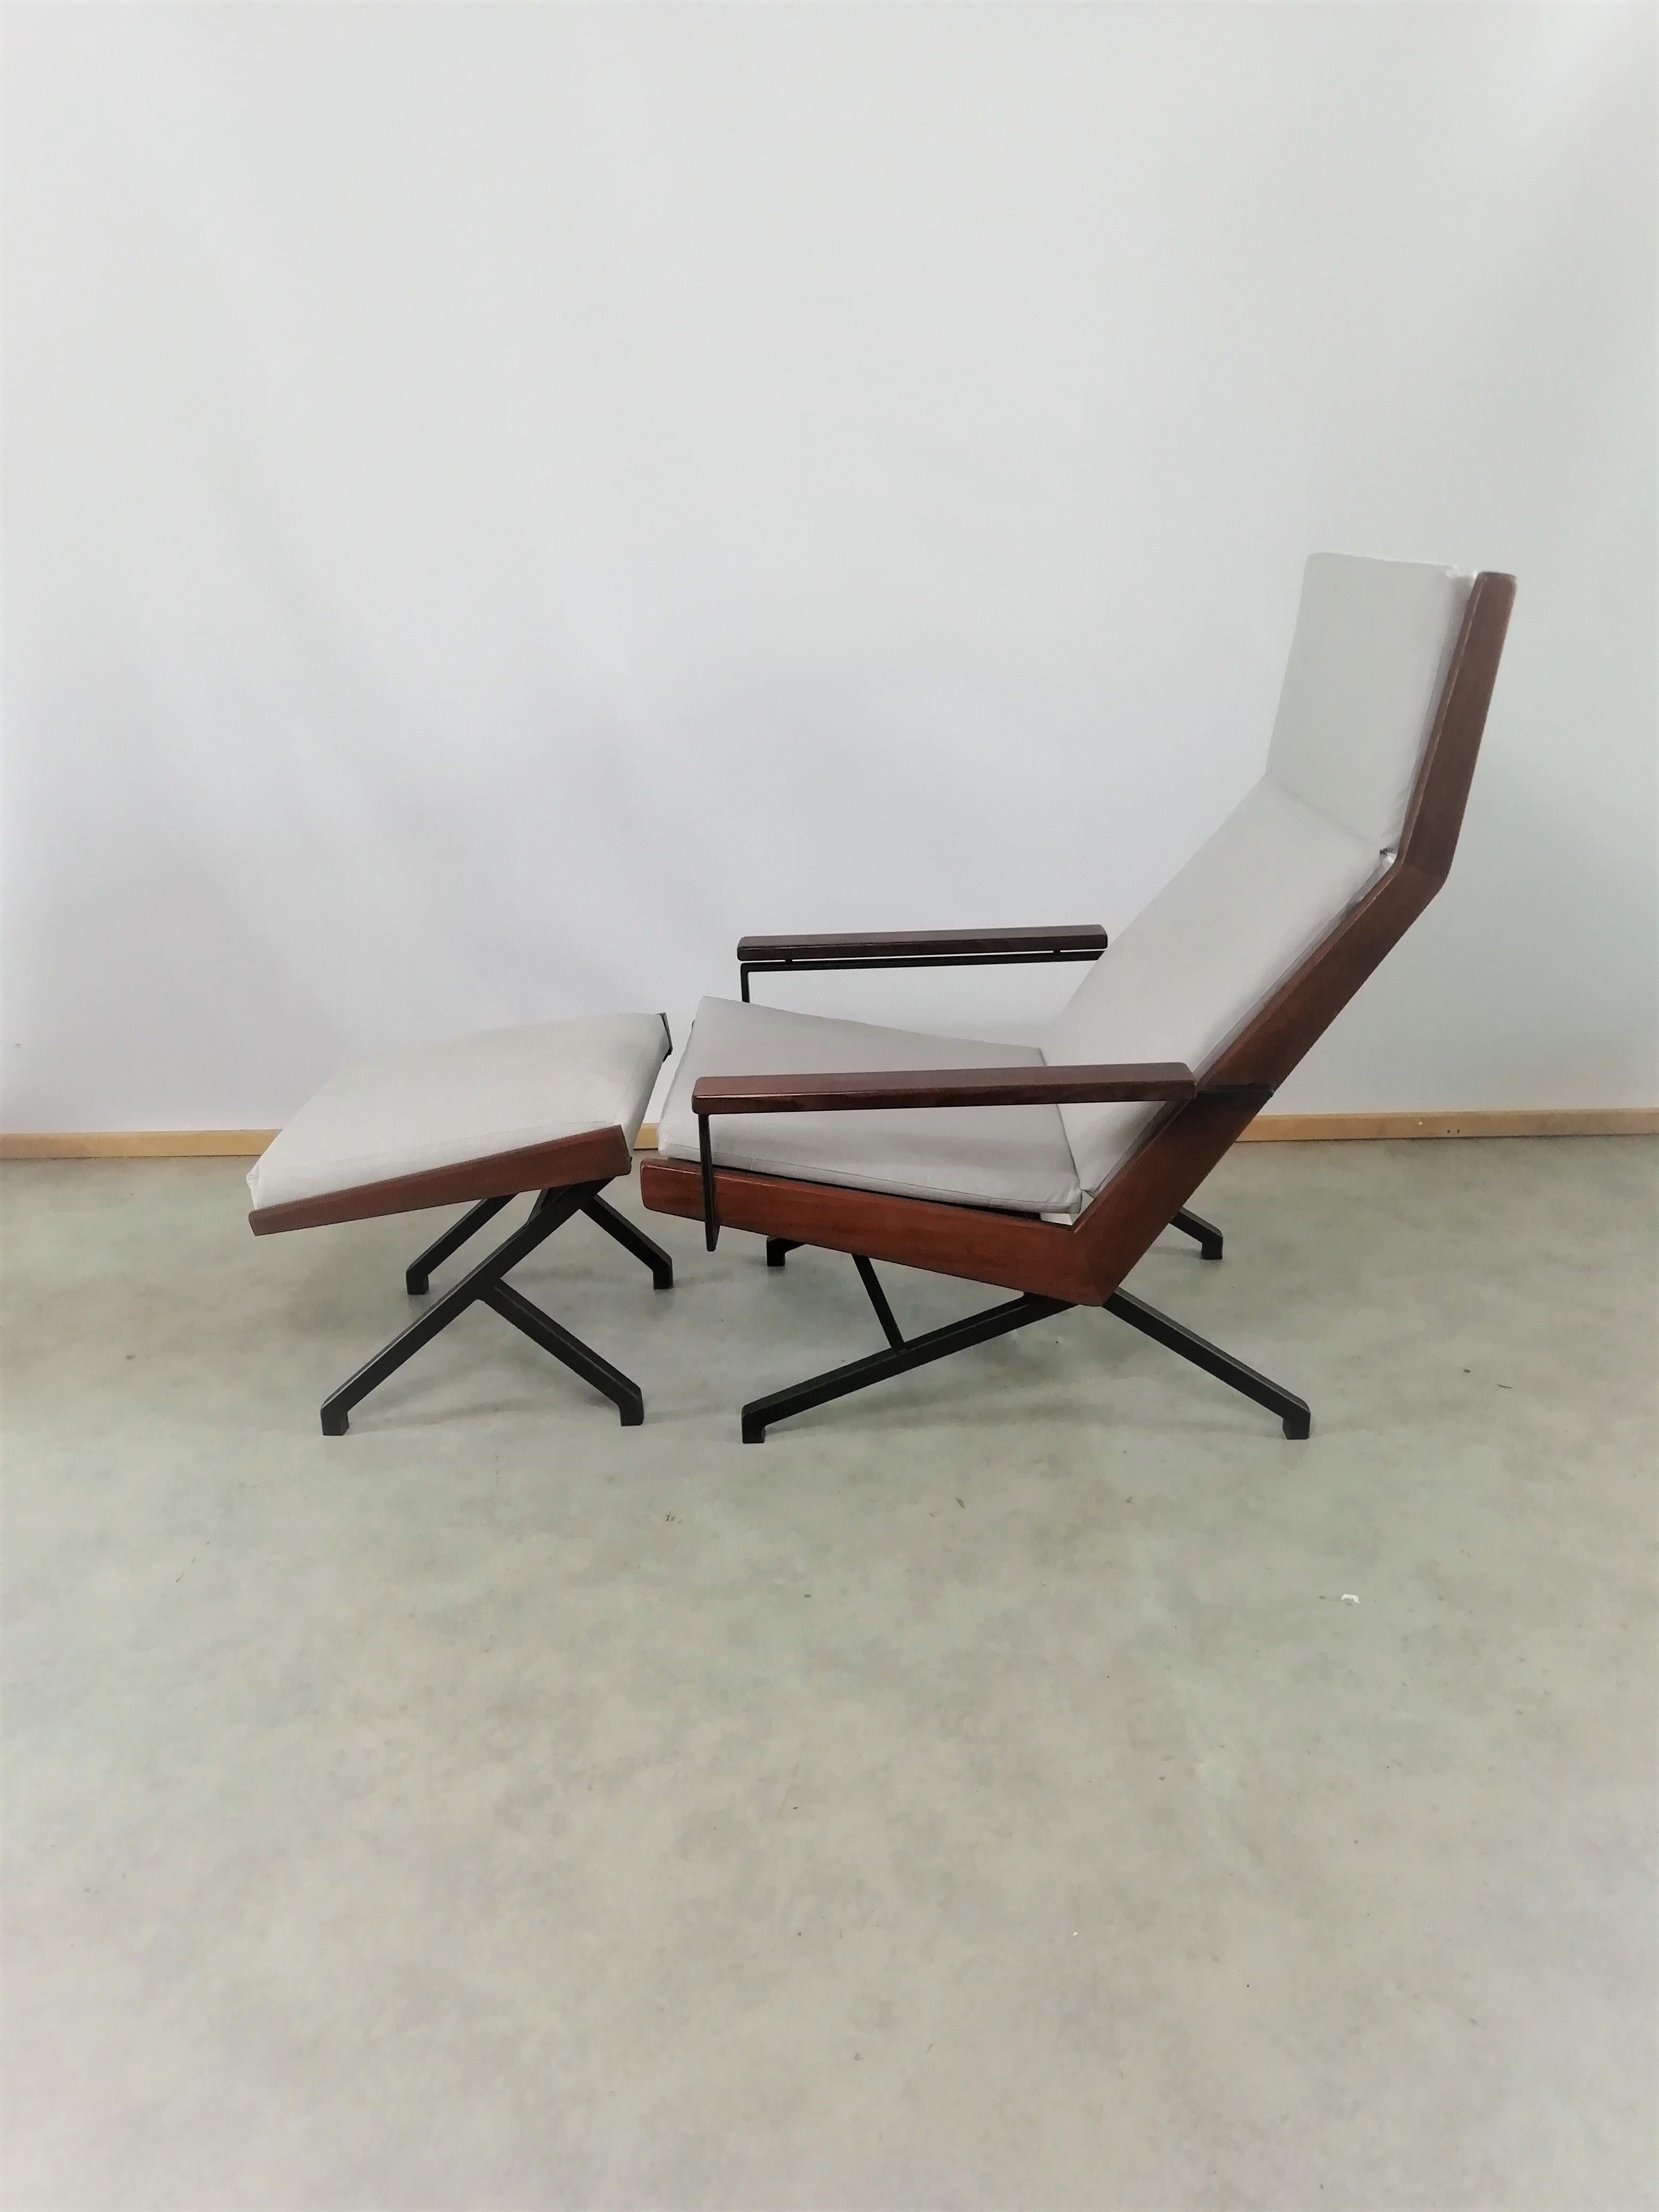 Lotus is one of the most loved of Rob Parry’s armchairs. It combines the reliable and functional solution and a modern combination of materials – metal, quality wood and homogeneous upholstery materials of good quality. End of the 50’s was this